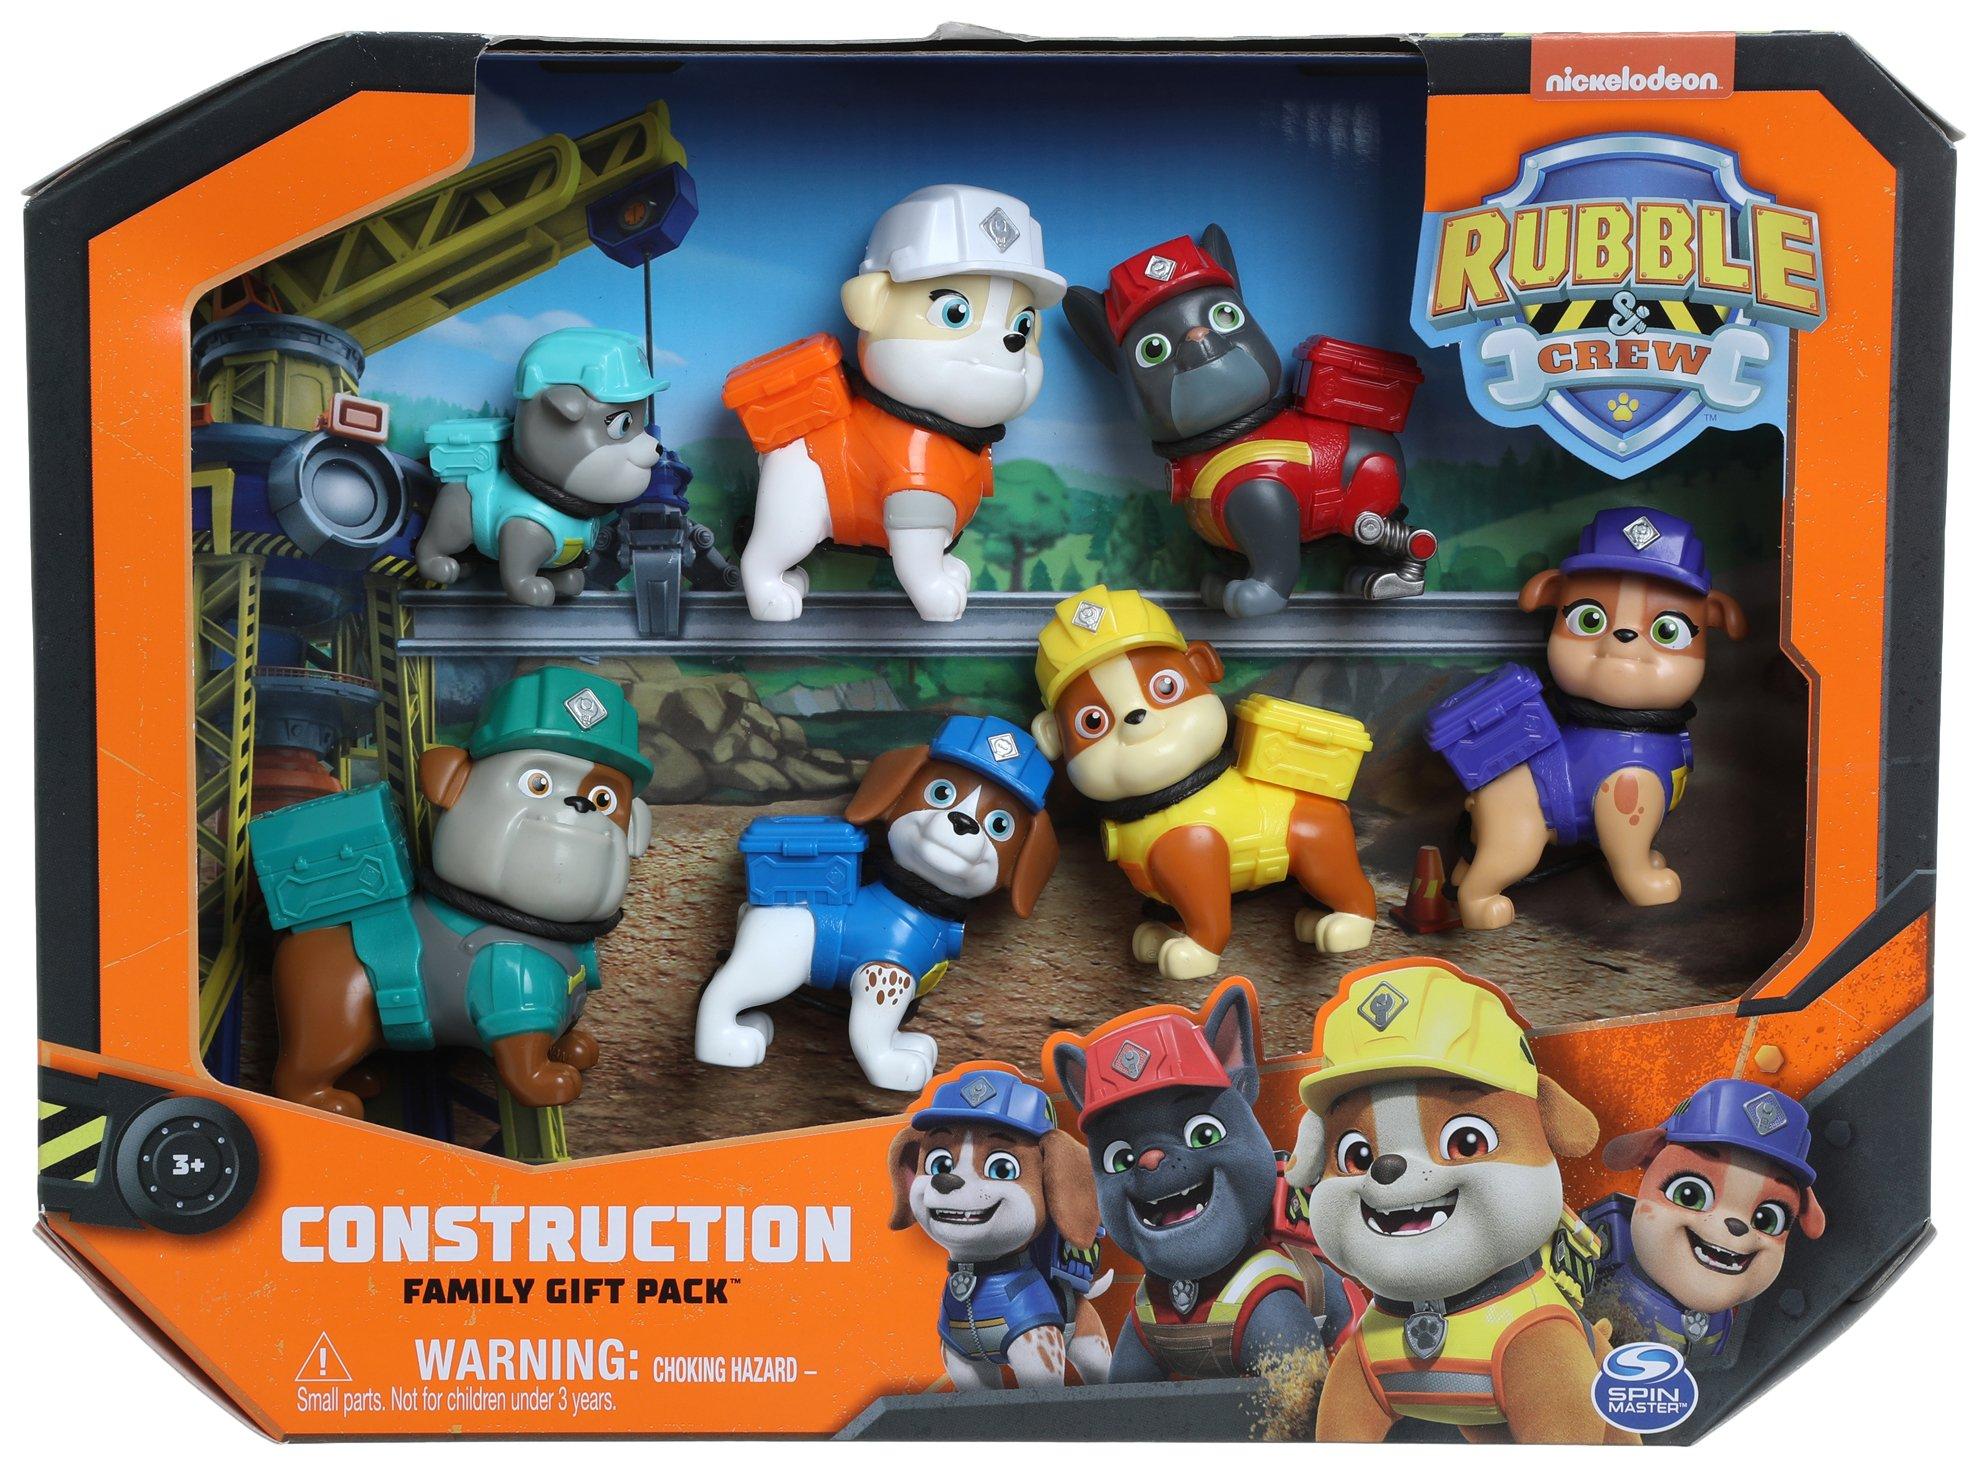 Rubble and Crew Construction Family Gift Pack